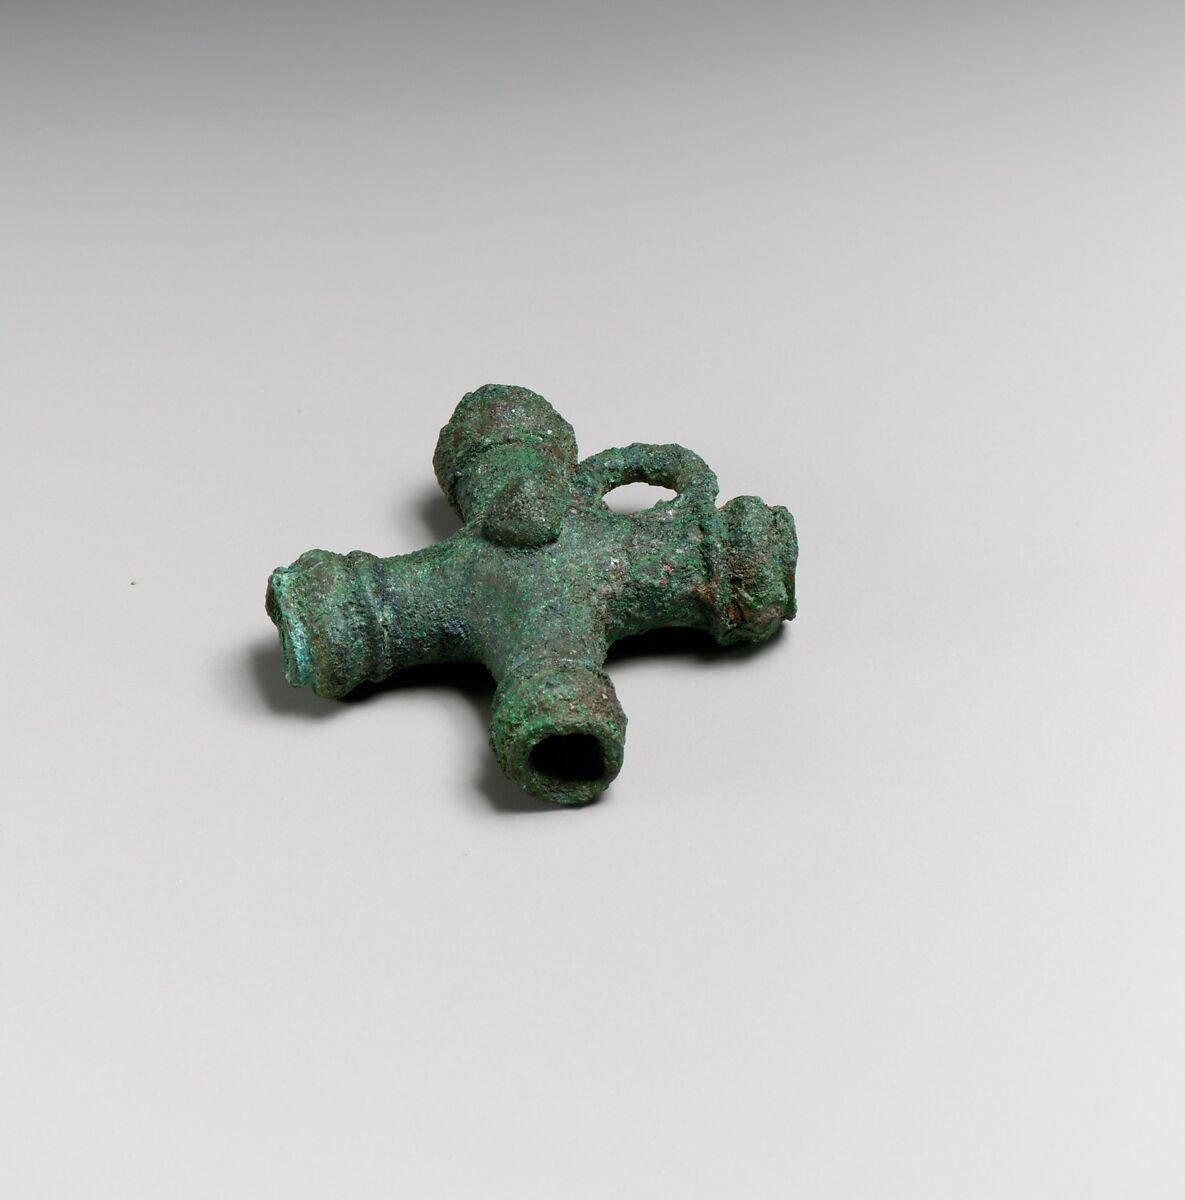 Fragments of a cart or chariot, crossed cylinders, Bronze, Etruscan 